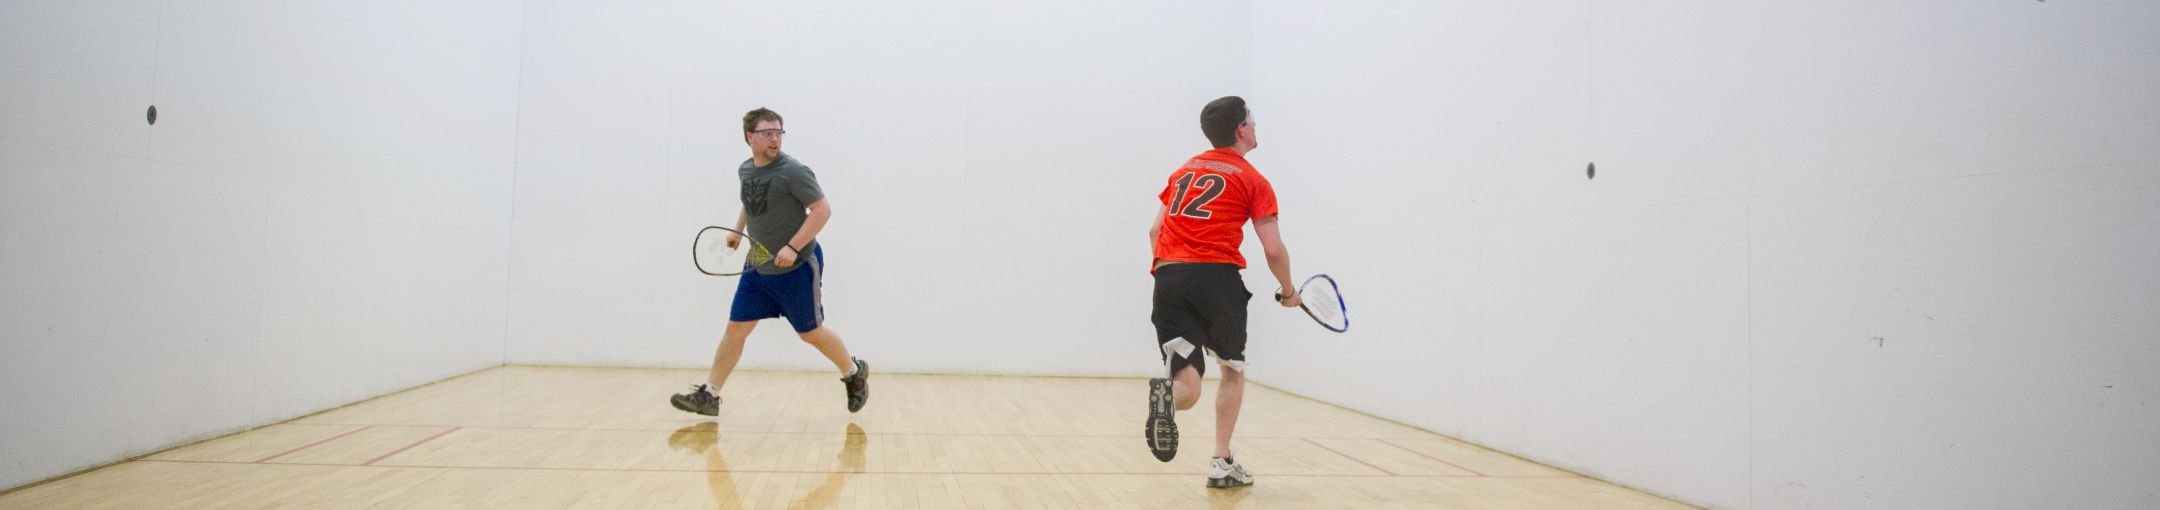 Two people playing racquetball.